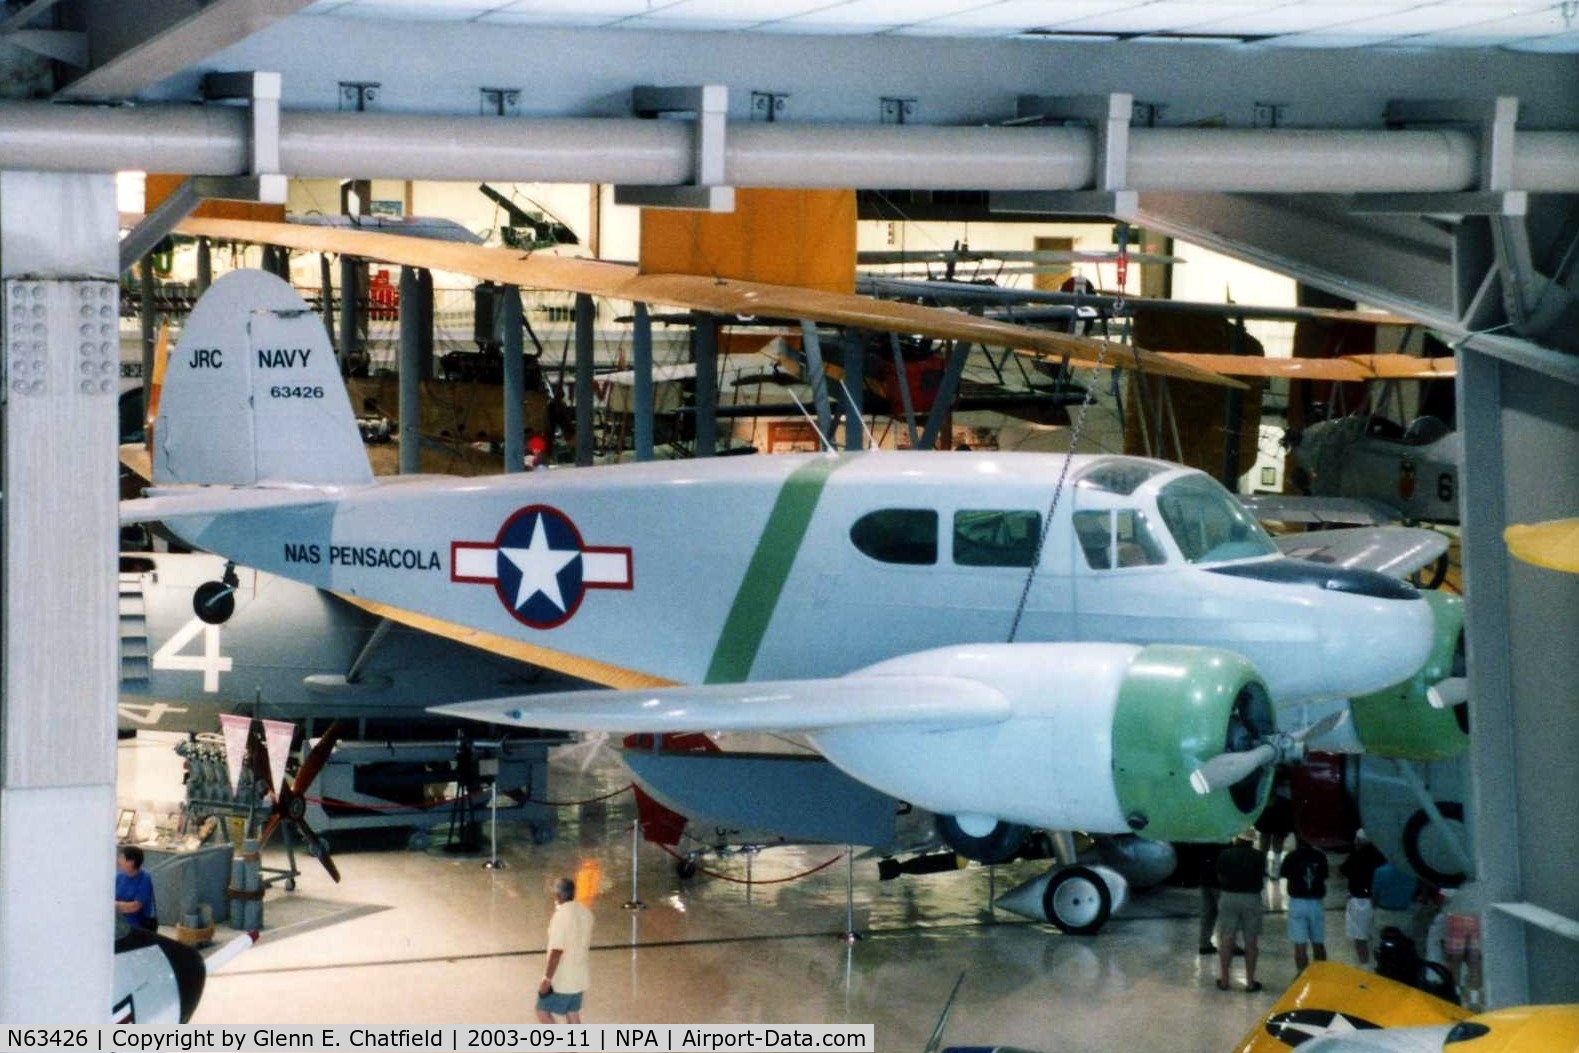 N63426, 1943 Cessna JRC-1 (UC-78) C/N 5515, UC-78B 43-7995 painted as JRC-1 at the National Museum of Naval Aviation